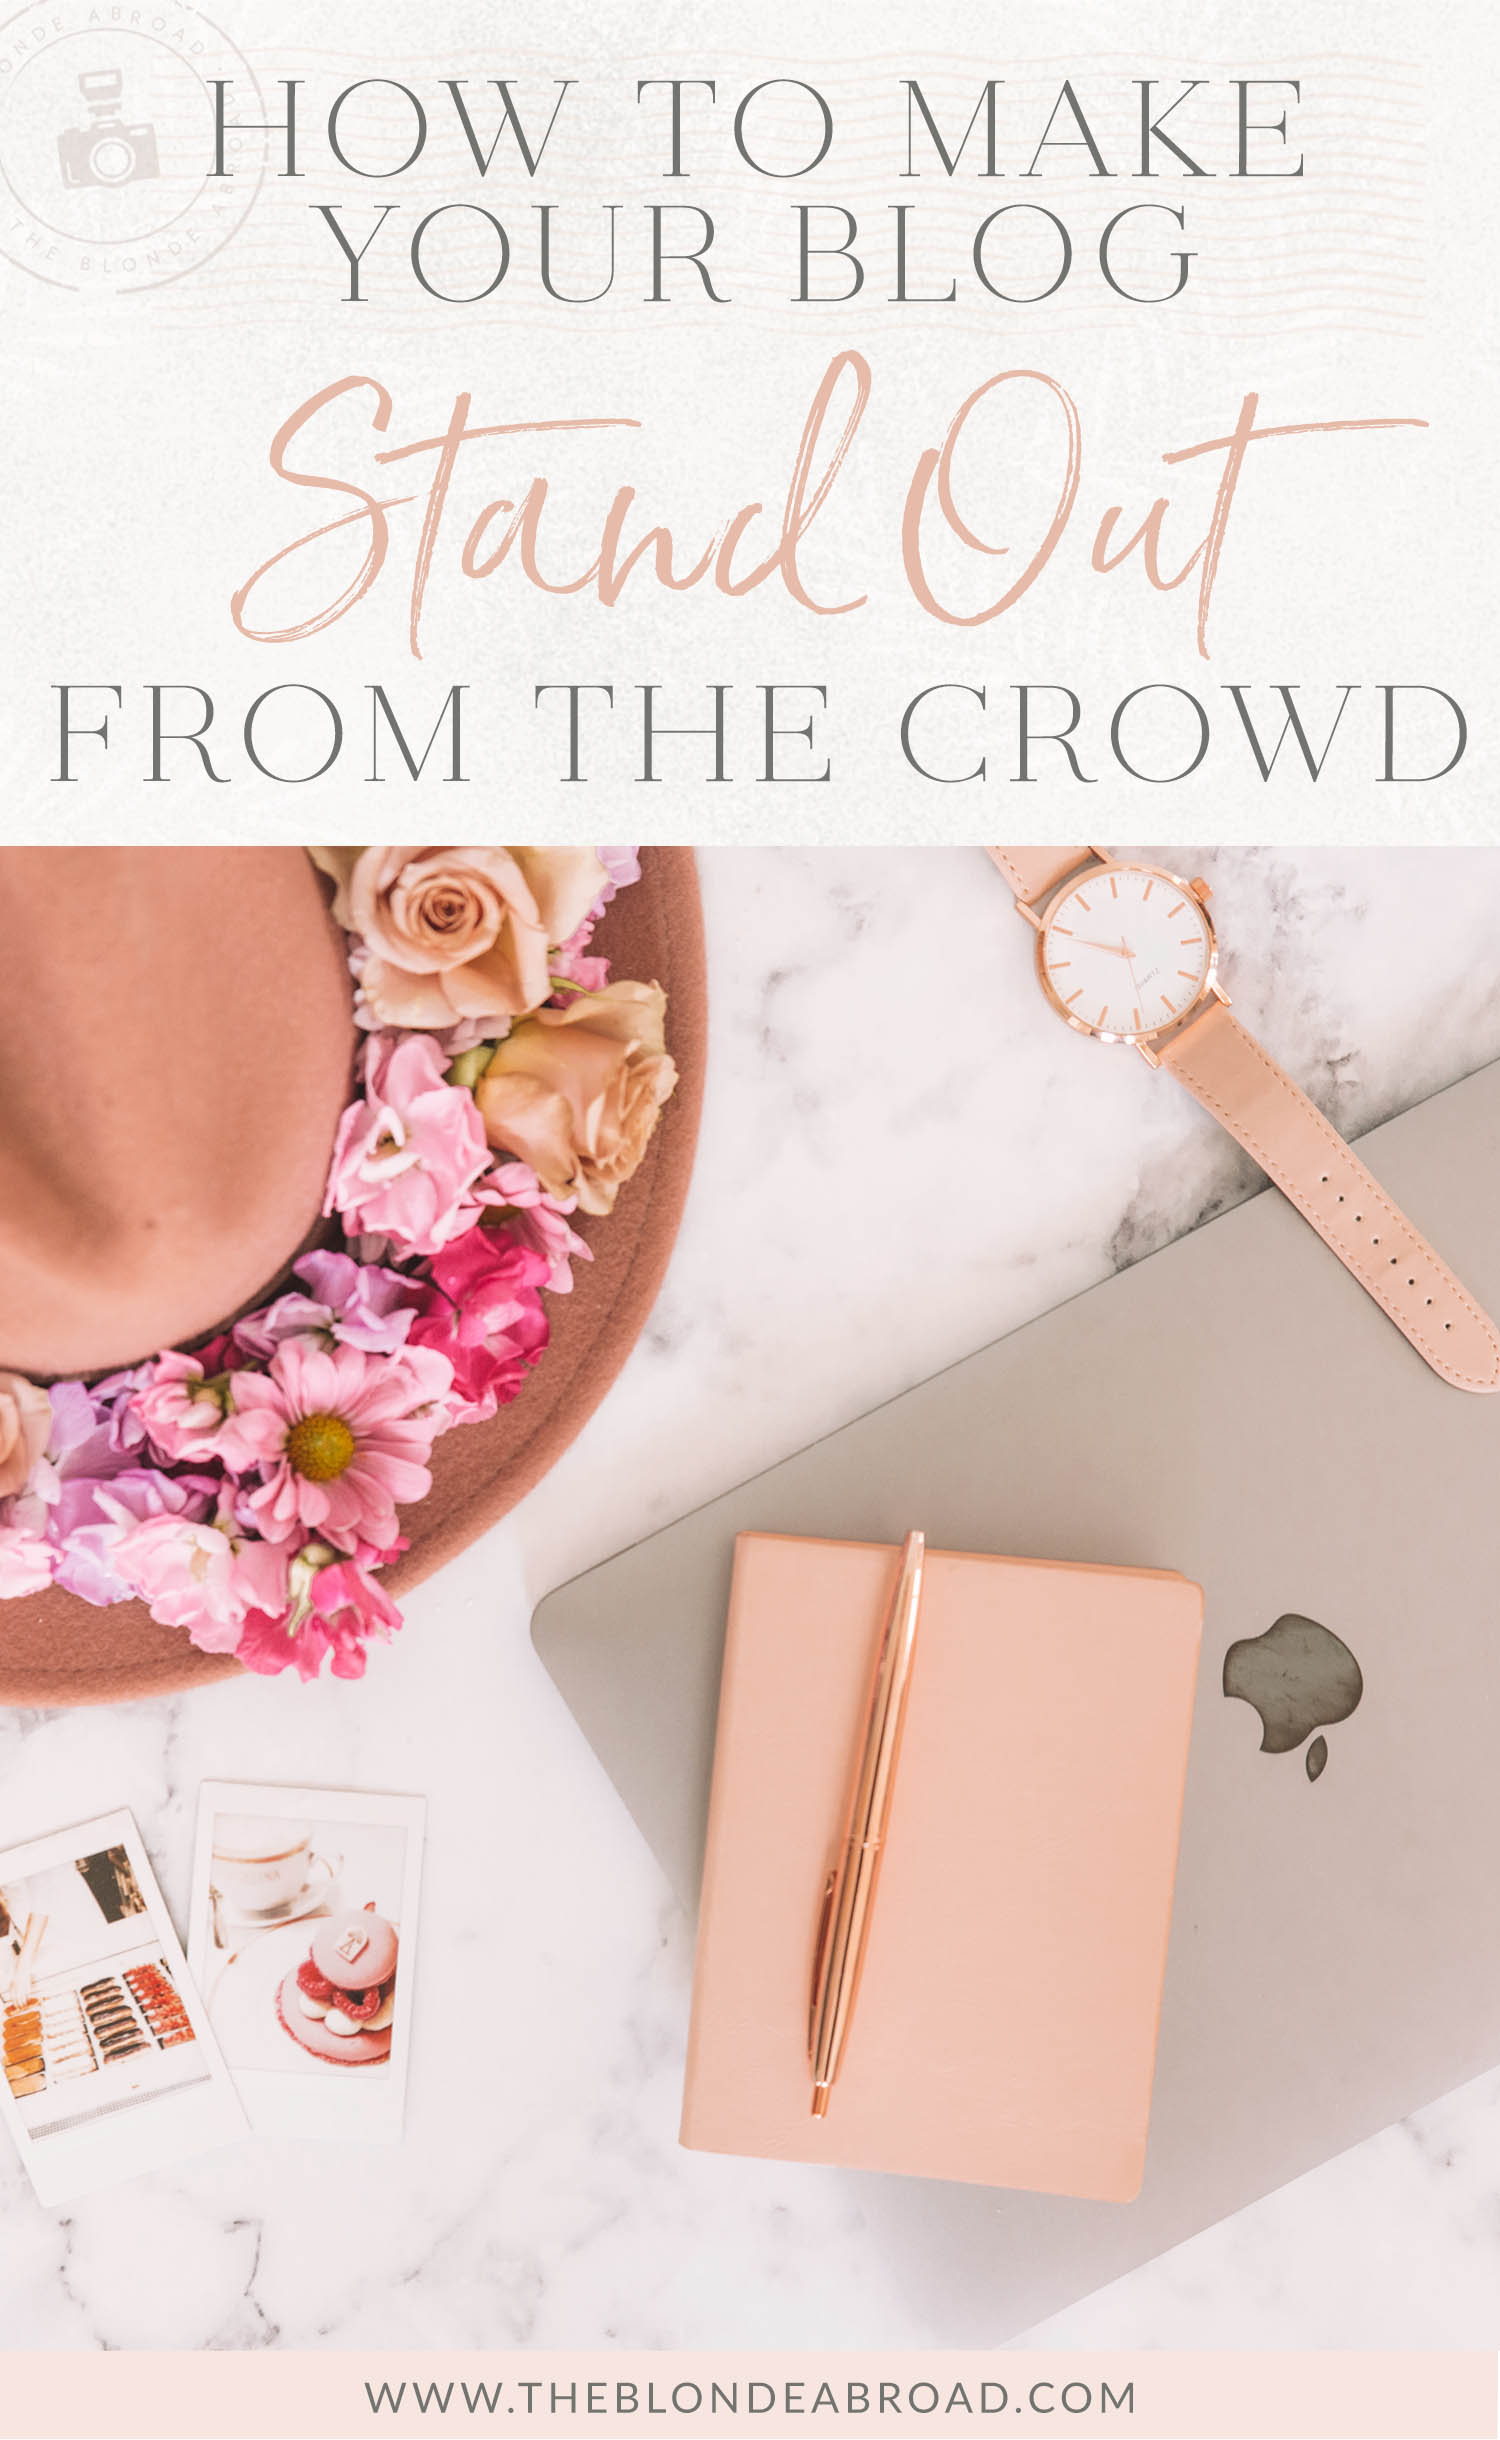 1How to Make Your Blog Stand Out from the crowd